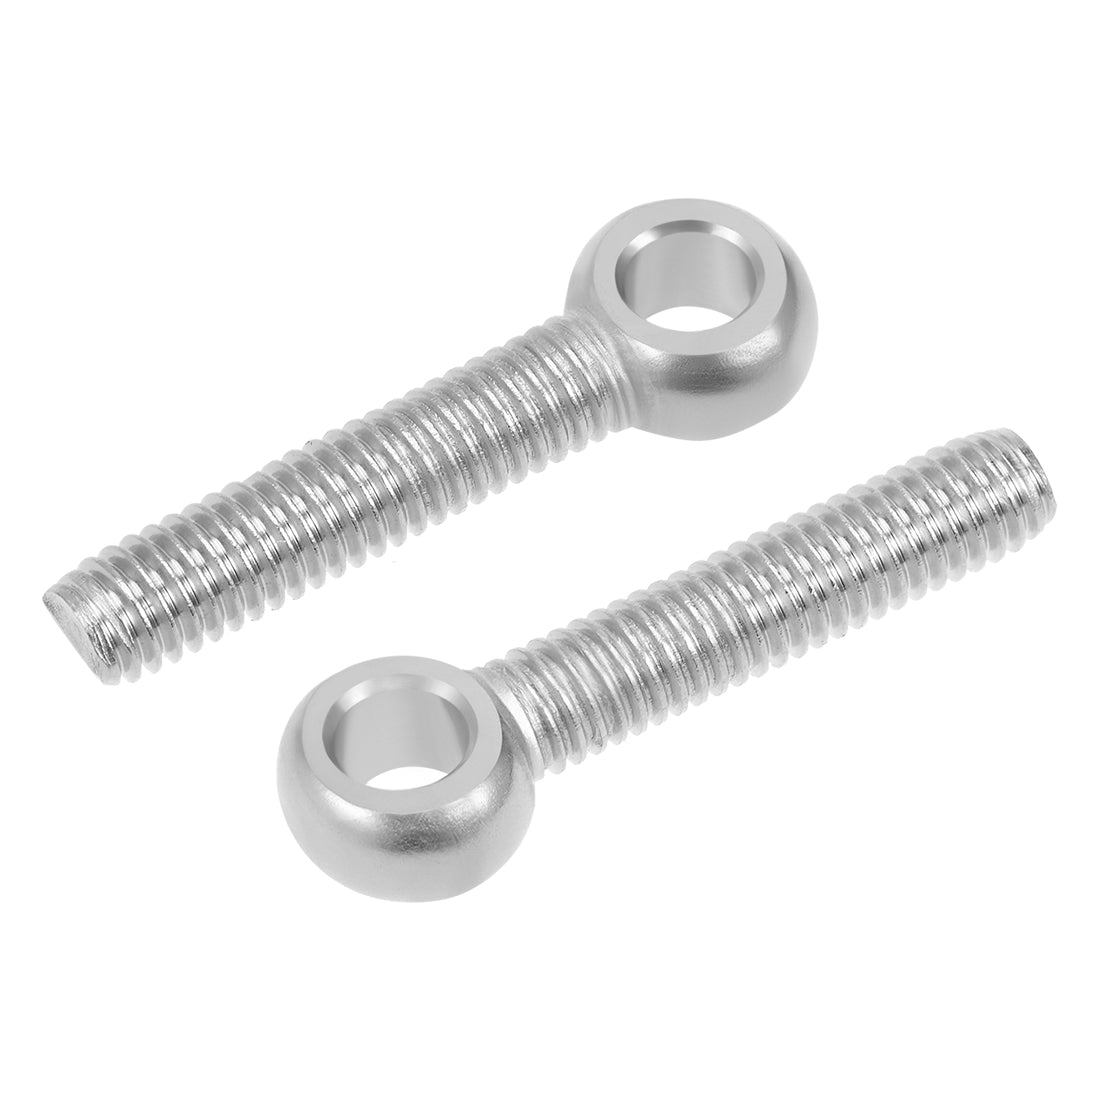 uxcell Uxcell M6 x 30mm Machinery Shoulder Swing Lifting Eye Bolt 304 Stainless Steel 5pcs